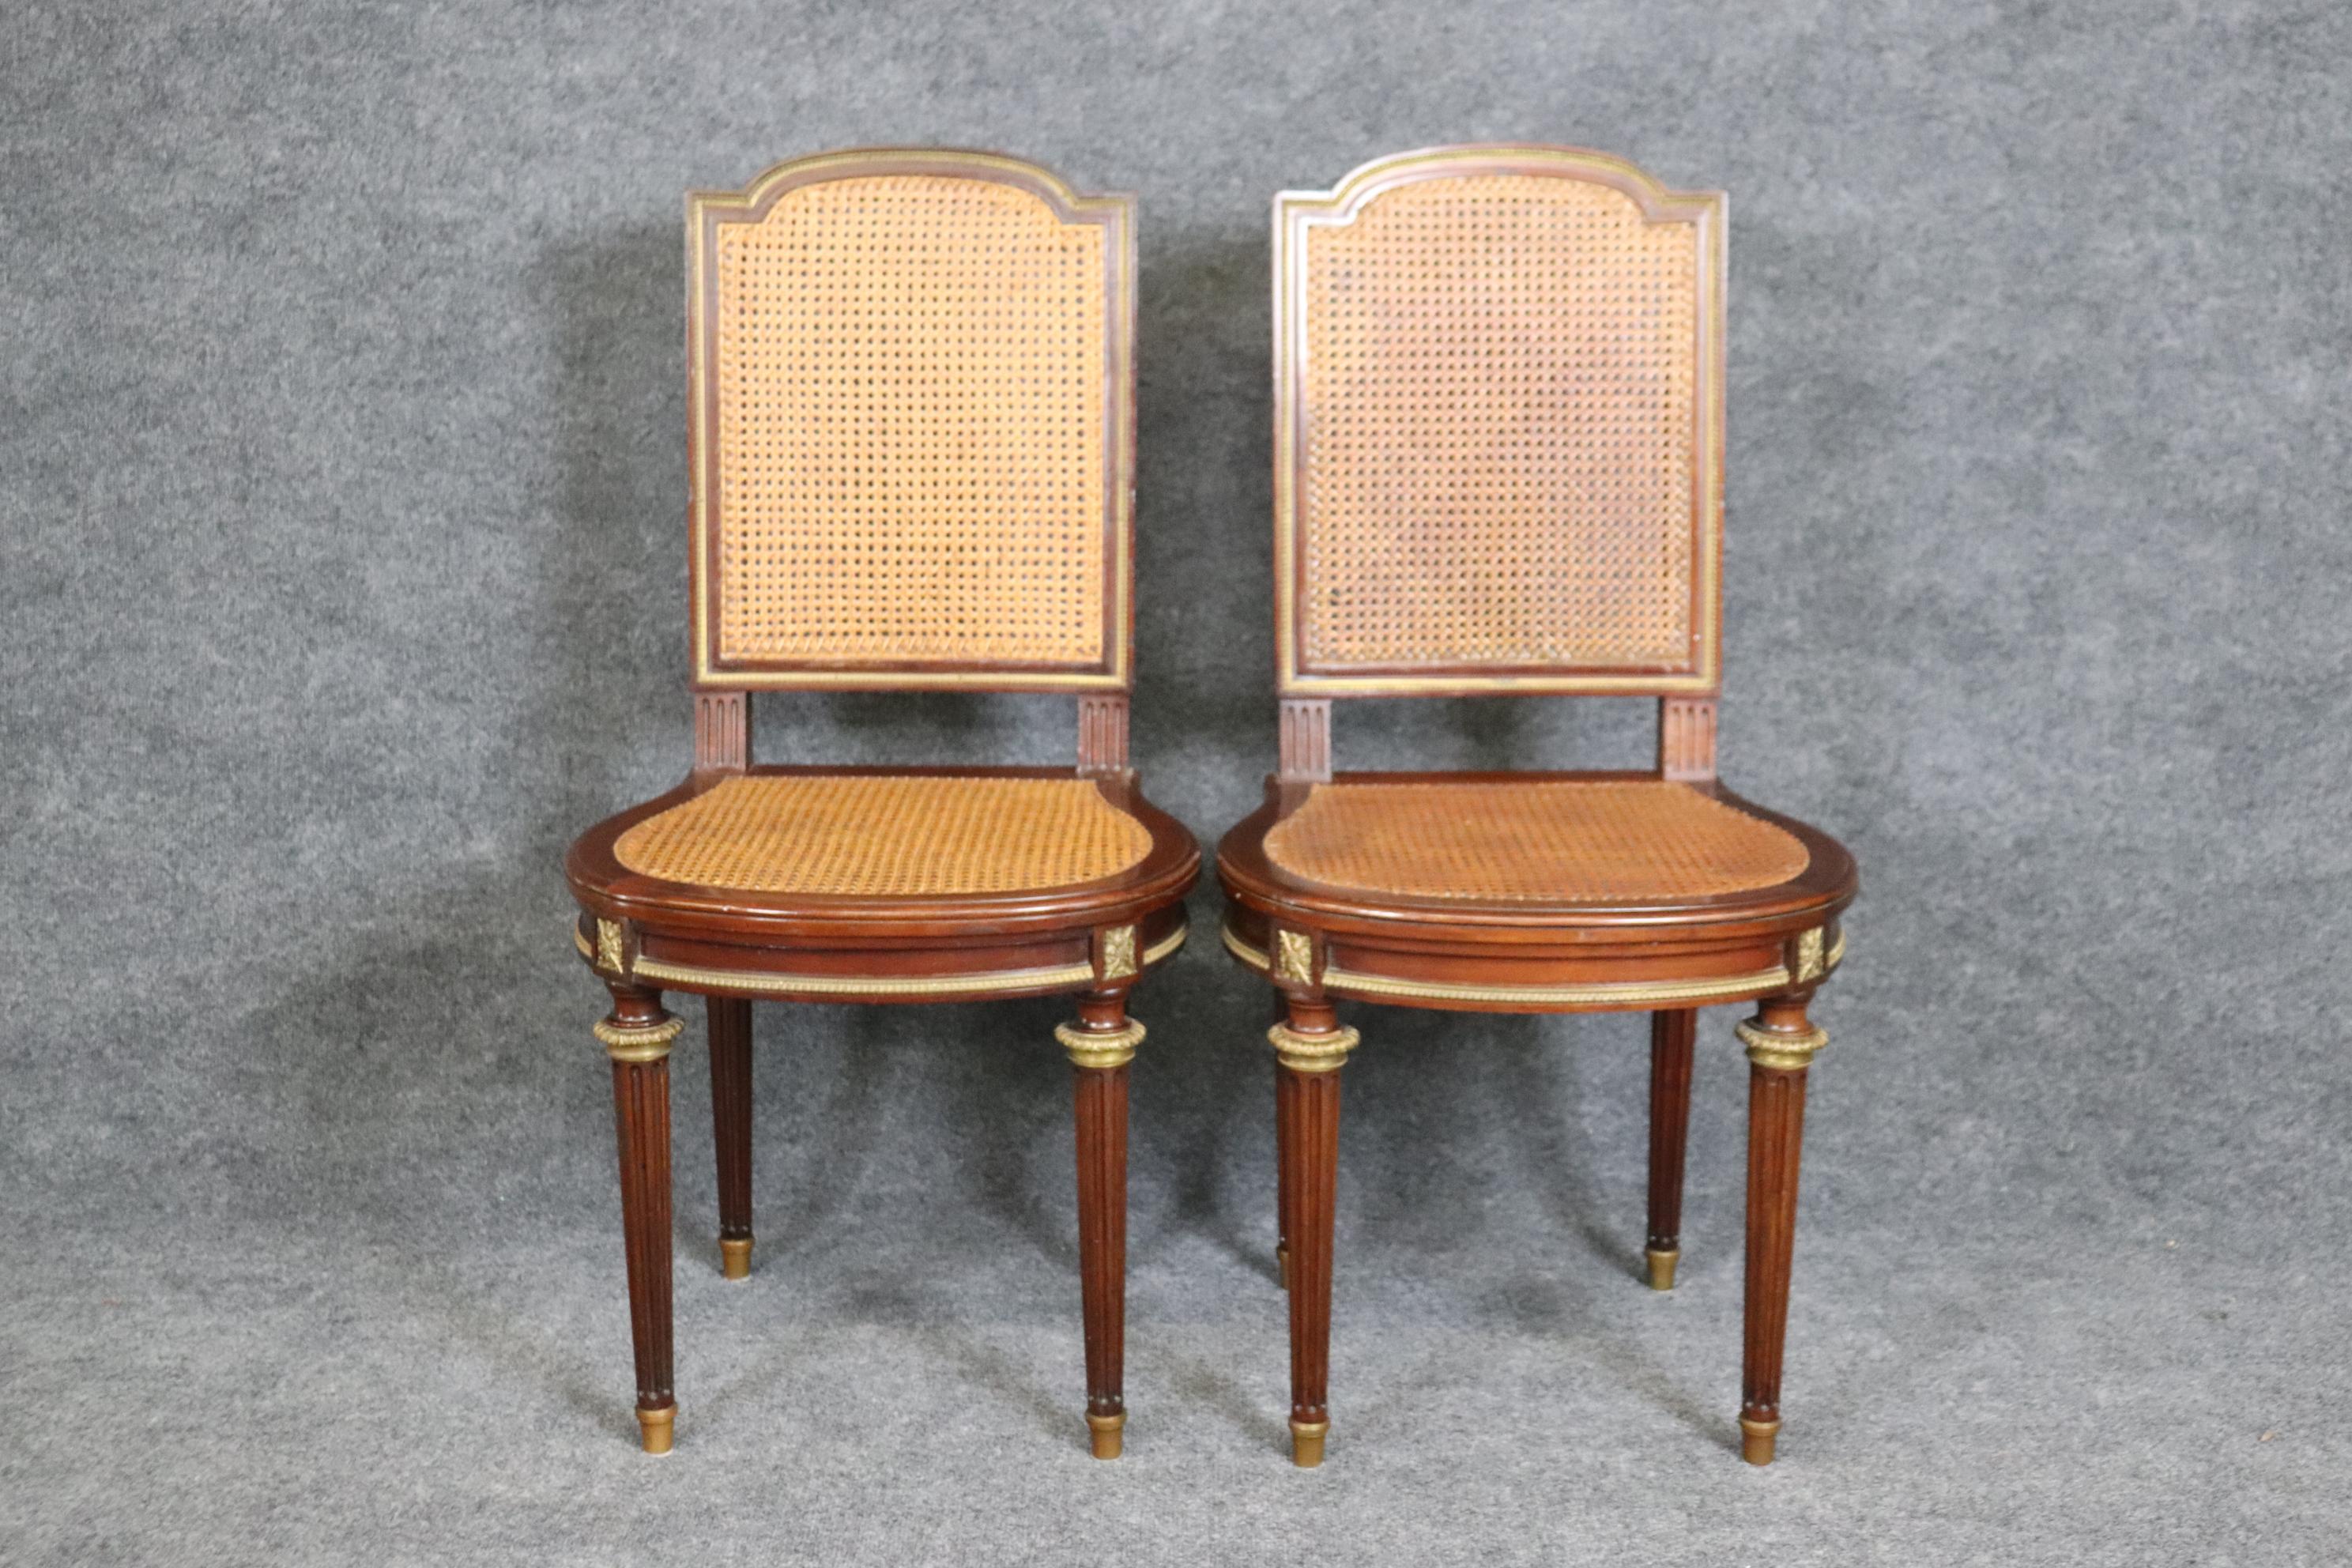 This is a gorgeous pair of French Louis XVI style signed Francois Linke Cane back and seated walnut side chairs. They are in good condition with minor signs of age and use but nothing significiant. Measures 19.5 deep x 19.75 wide x 40 tall x 18.75